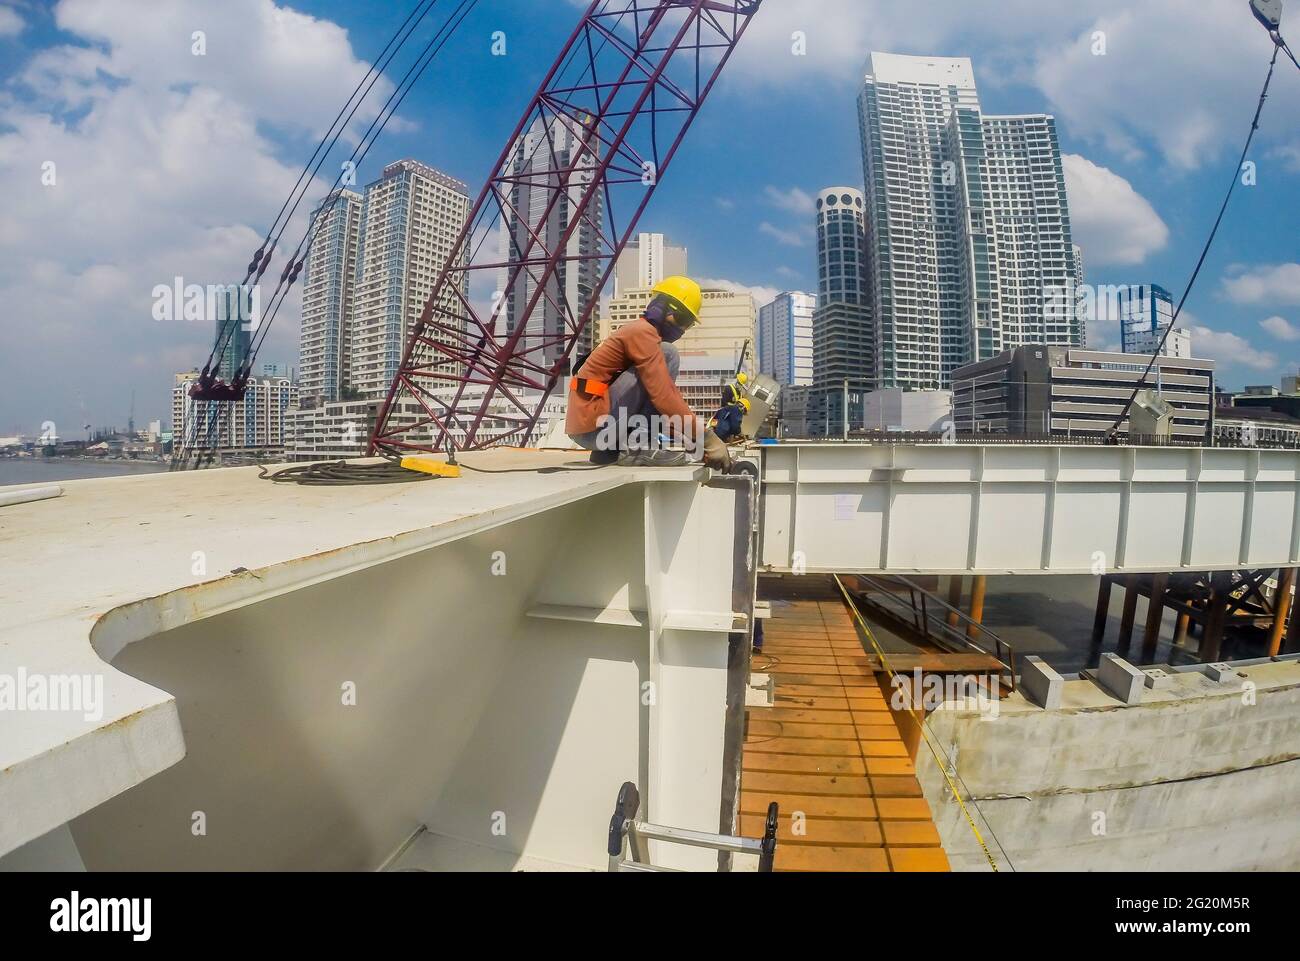 Chongqing, Philippines. 18th Nov, 2020. Workers work at the construction site of the China-funded Binondo-Intramuros Bridge in Manila, the Philippines, Nov. 18, 2020. Credit: Rouelle Umali/Xinhua/Alamy Live News Stock Photo